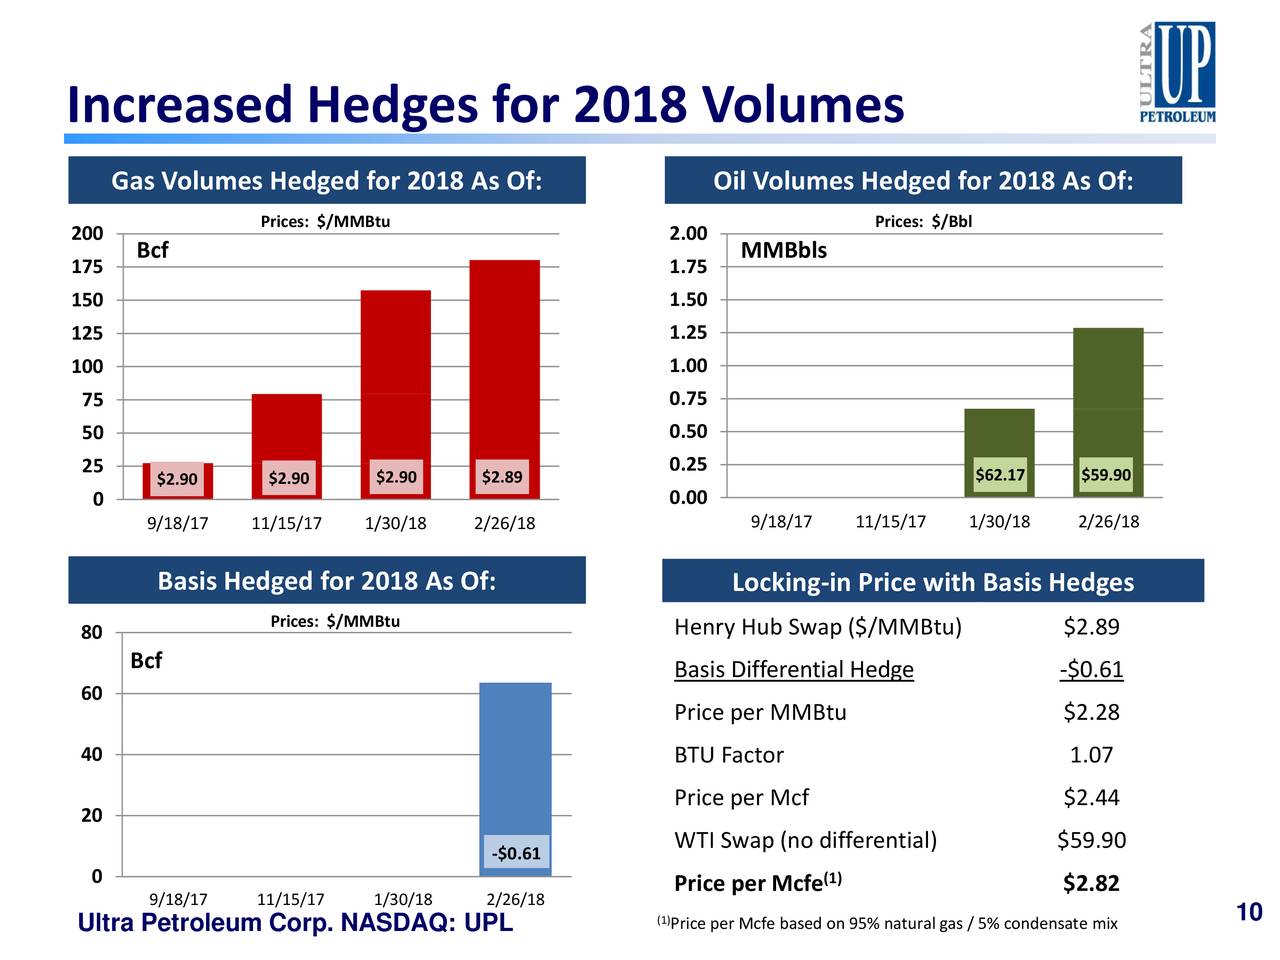 Increased Hedges for 2018 Volumes